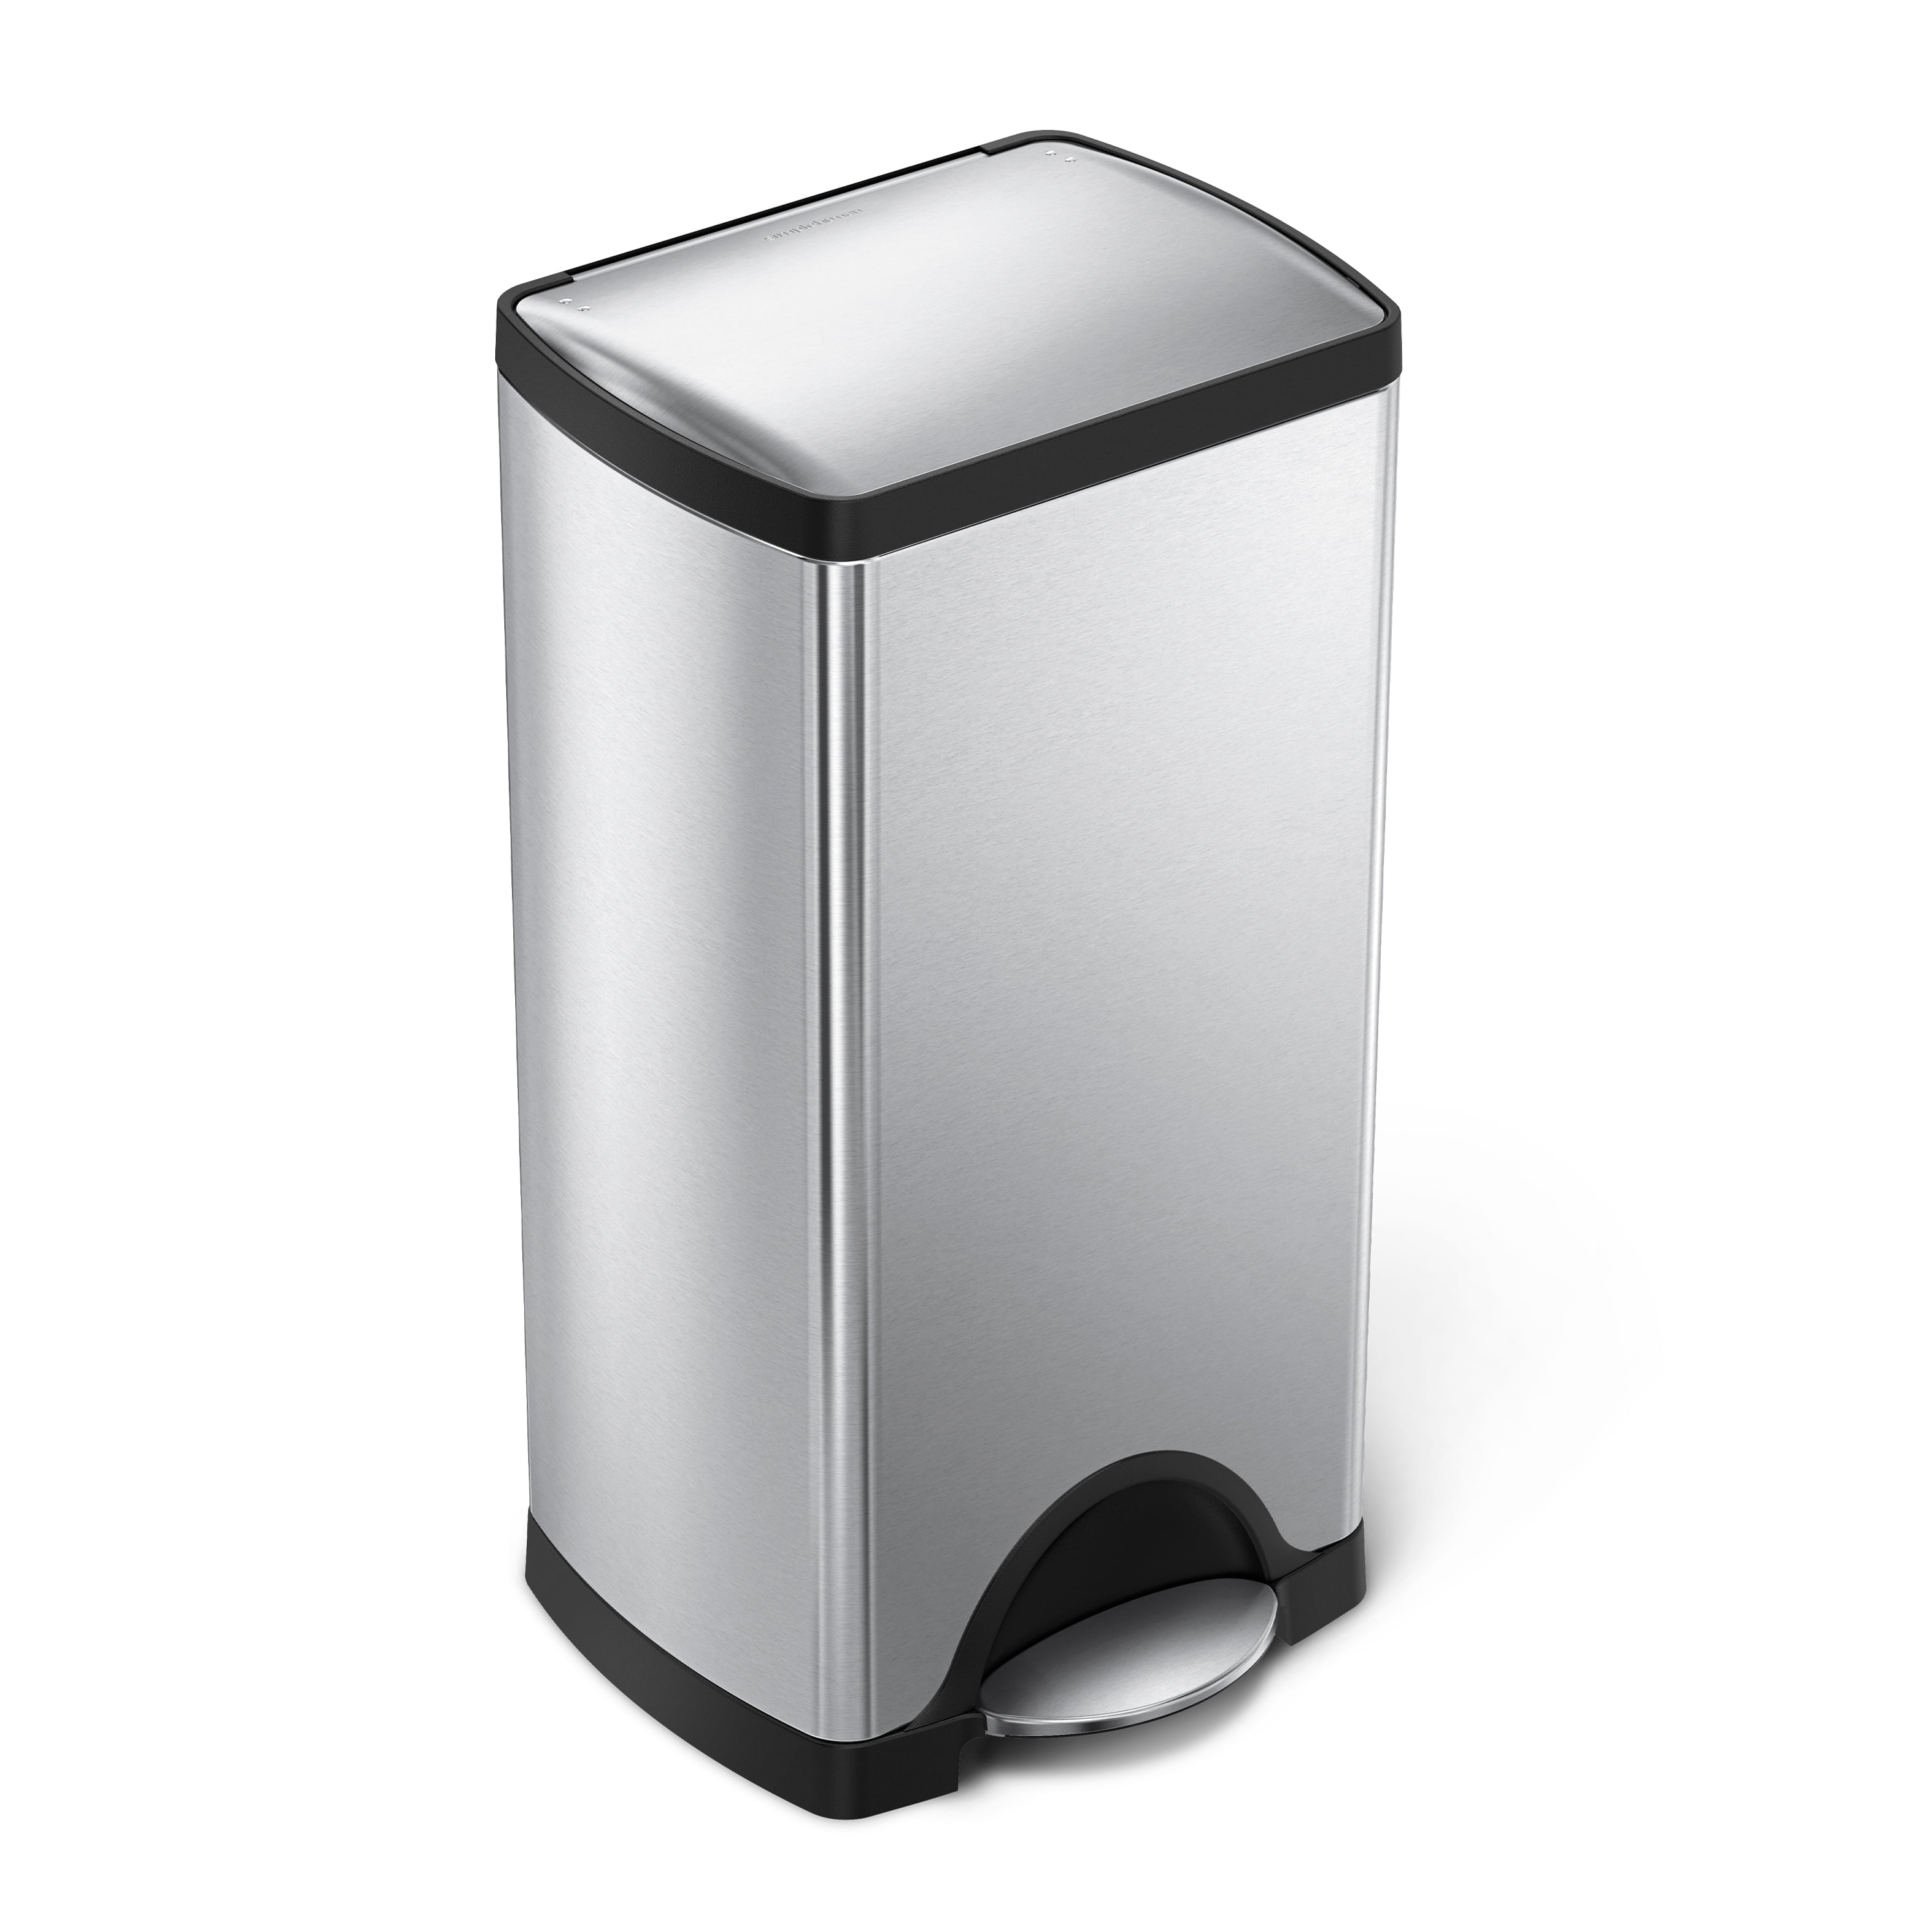 8 Gallon Stainless Steel Rectangular Kitchen Step Trash Can with Liner Pocket simplehuman 30 Liter Brushed Stainless Steel